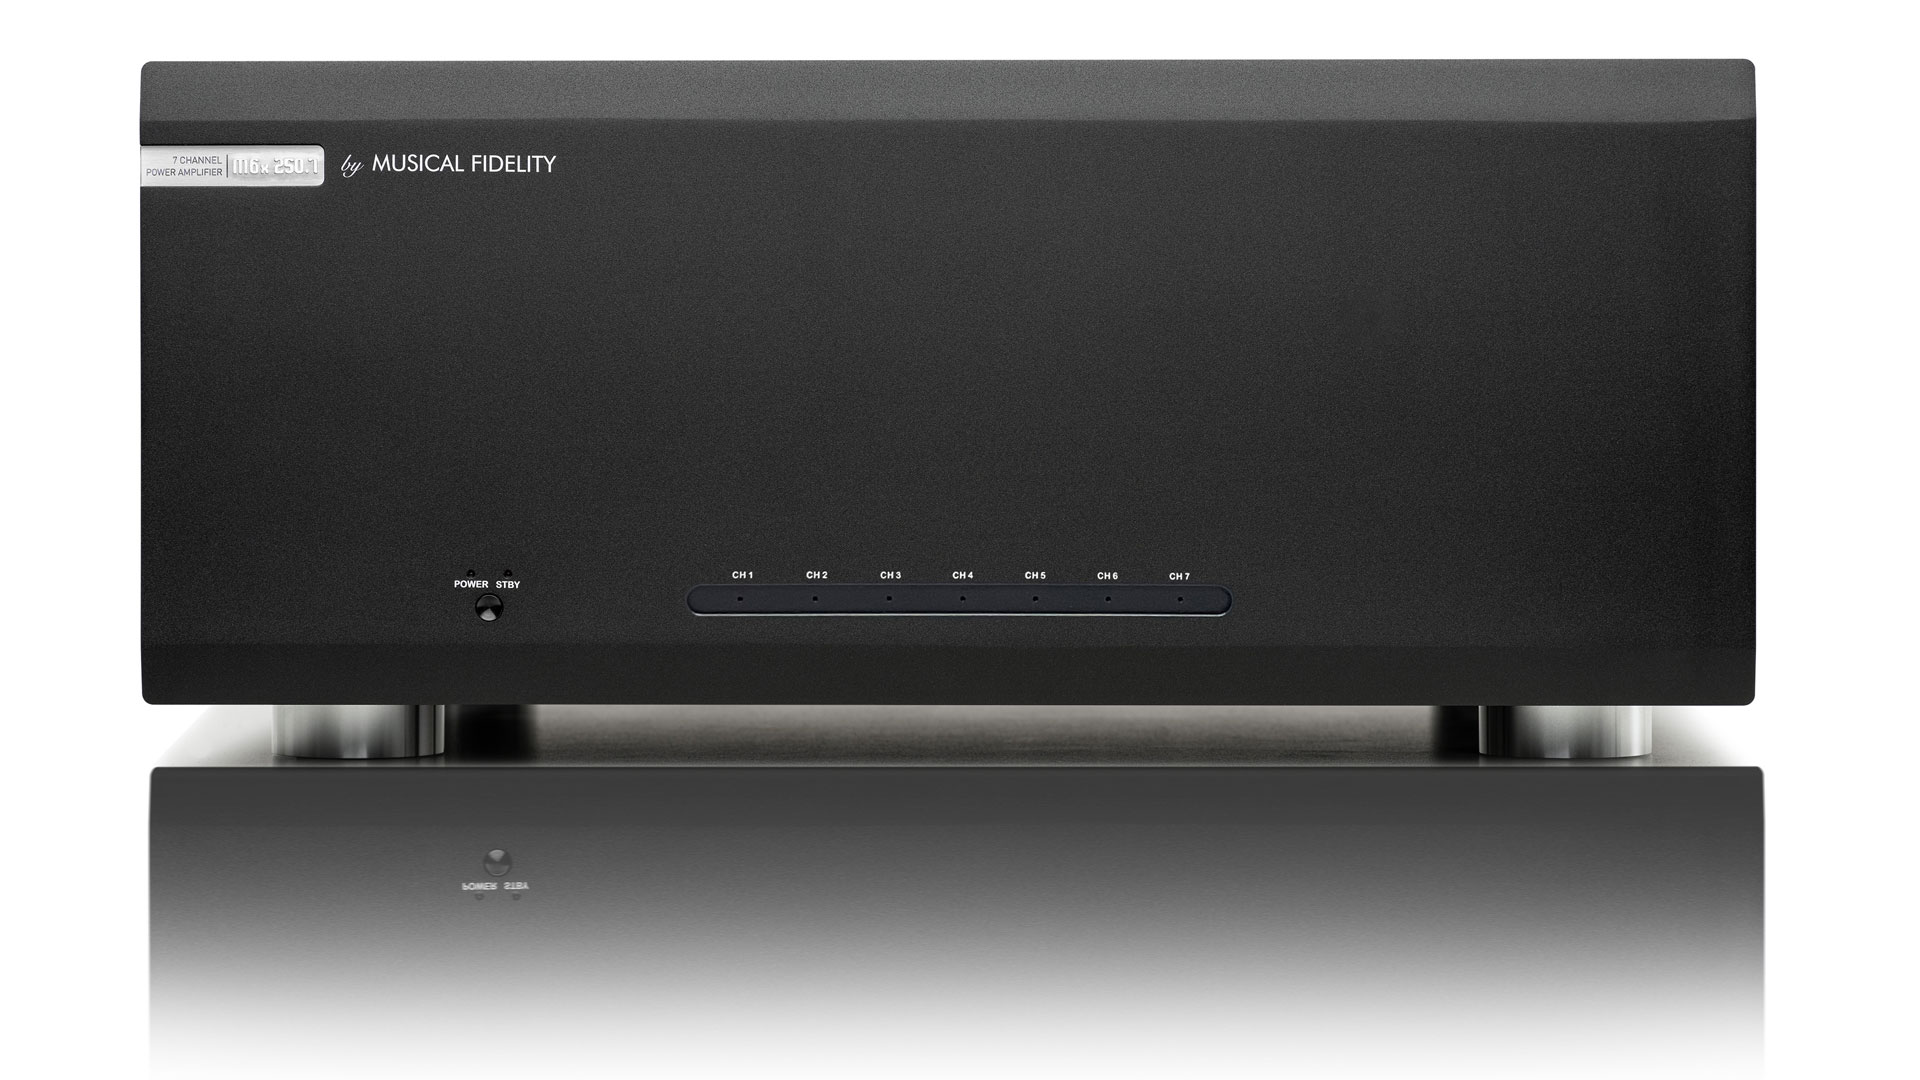 The new Musical Fidelity power amp M6x 250.7 (Image Credit: Musical Fidelity)